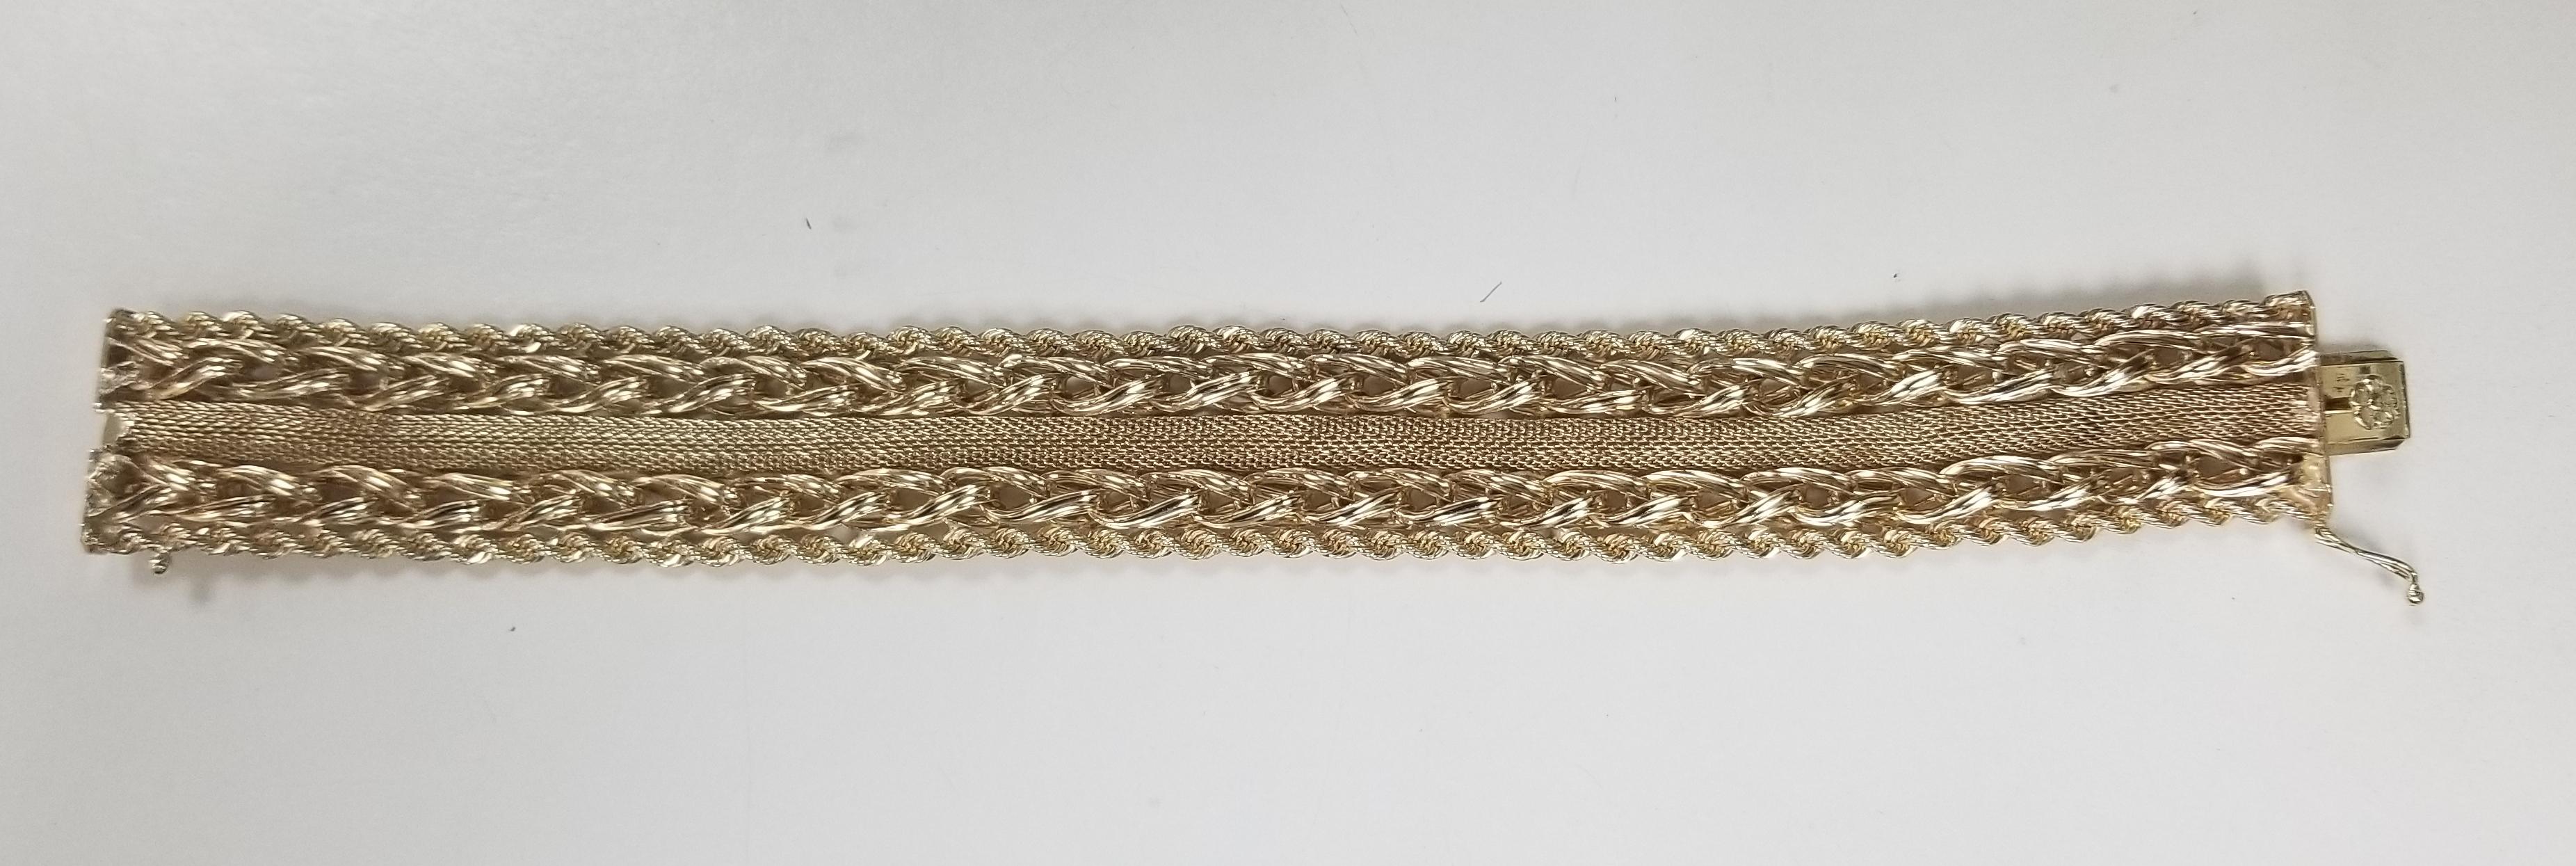 14k yellow gold rope, link and mesh 1 inch wide bracelet, the bracelet measures 8 inches and weighs 72.52 grams.